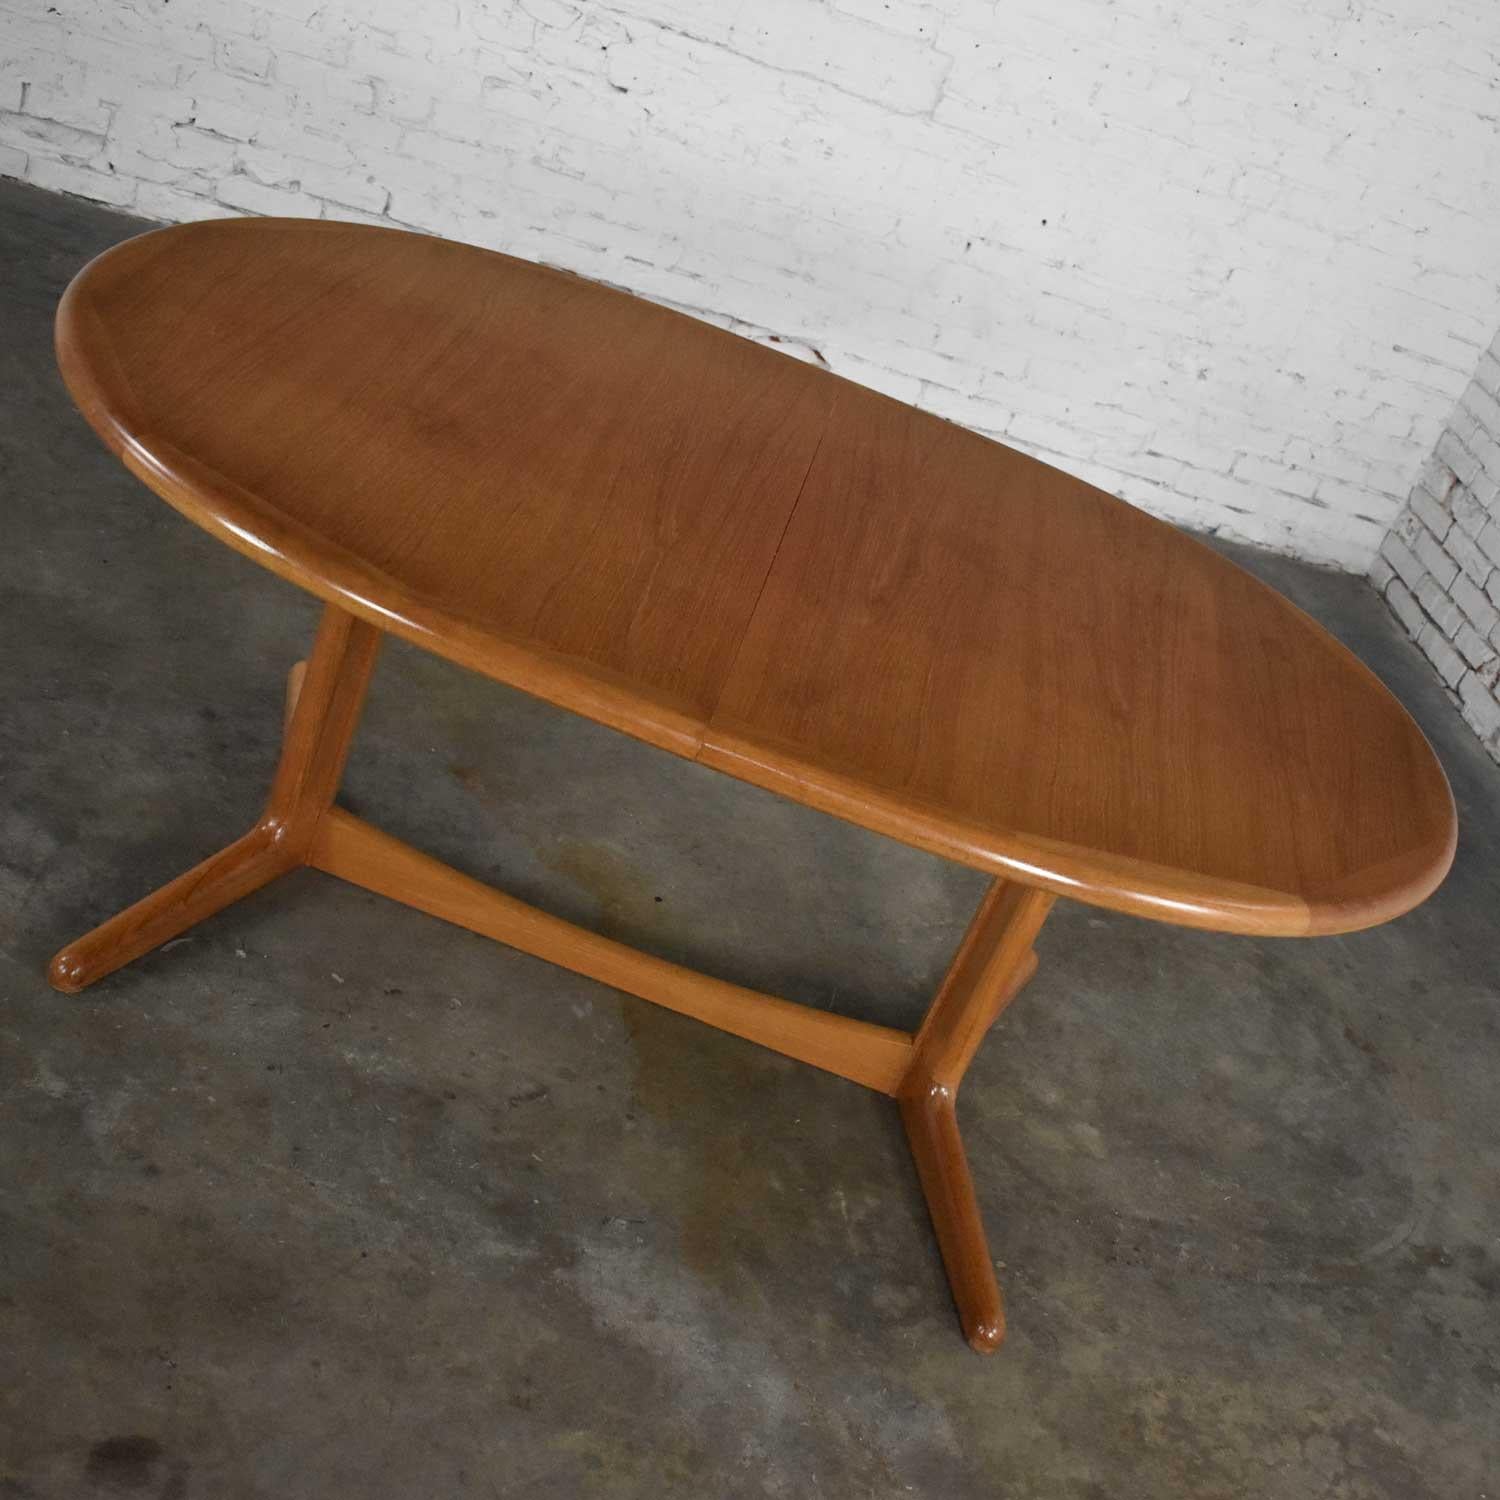 20th Century Scandinavian Modern Teak Oval Dining Table with Integral Leaf Style Dyrlund